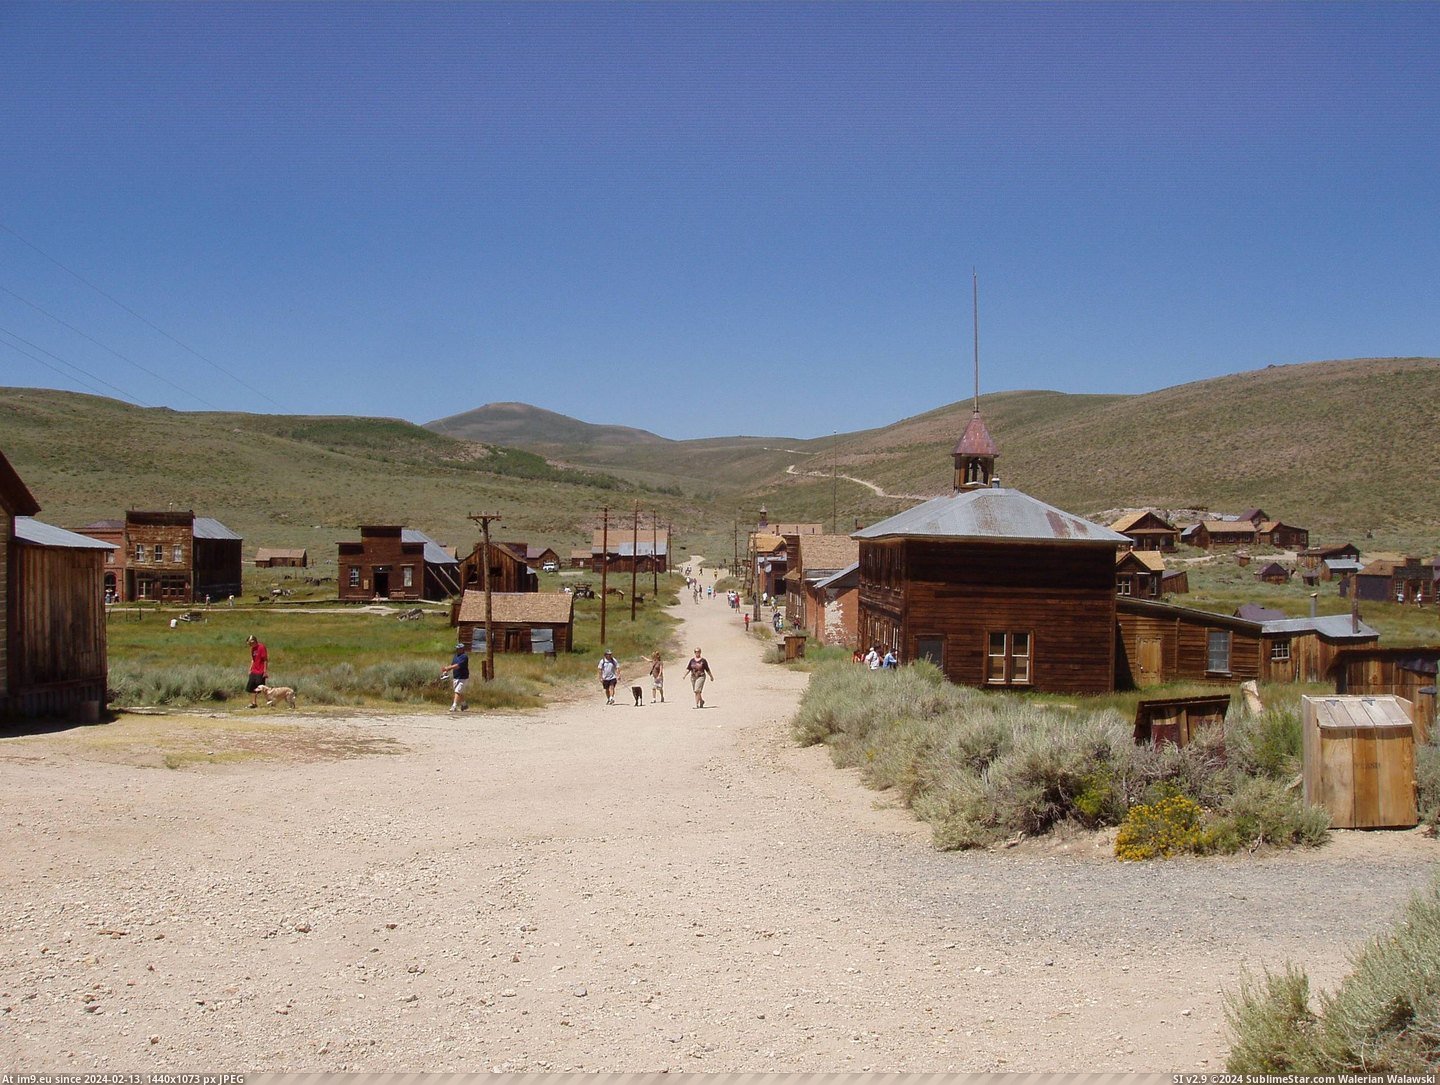 #Bodie  #Aug Bodie 6 Aug. 2006 Pic. (Изображение из альбом Bodie - a ghost town in Eastern California))